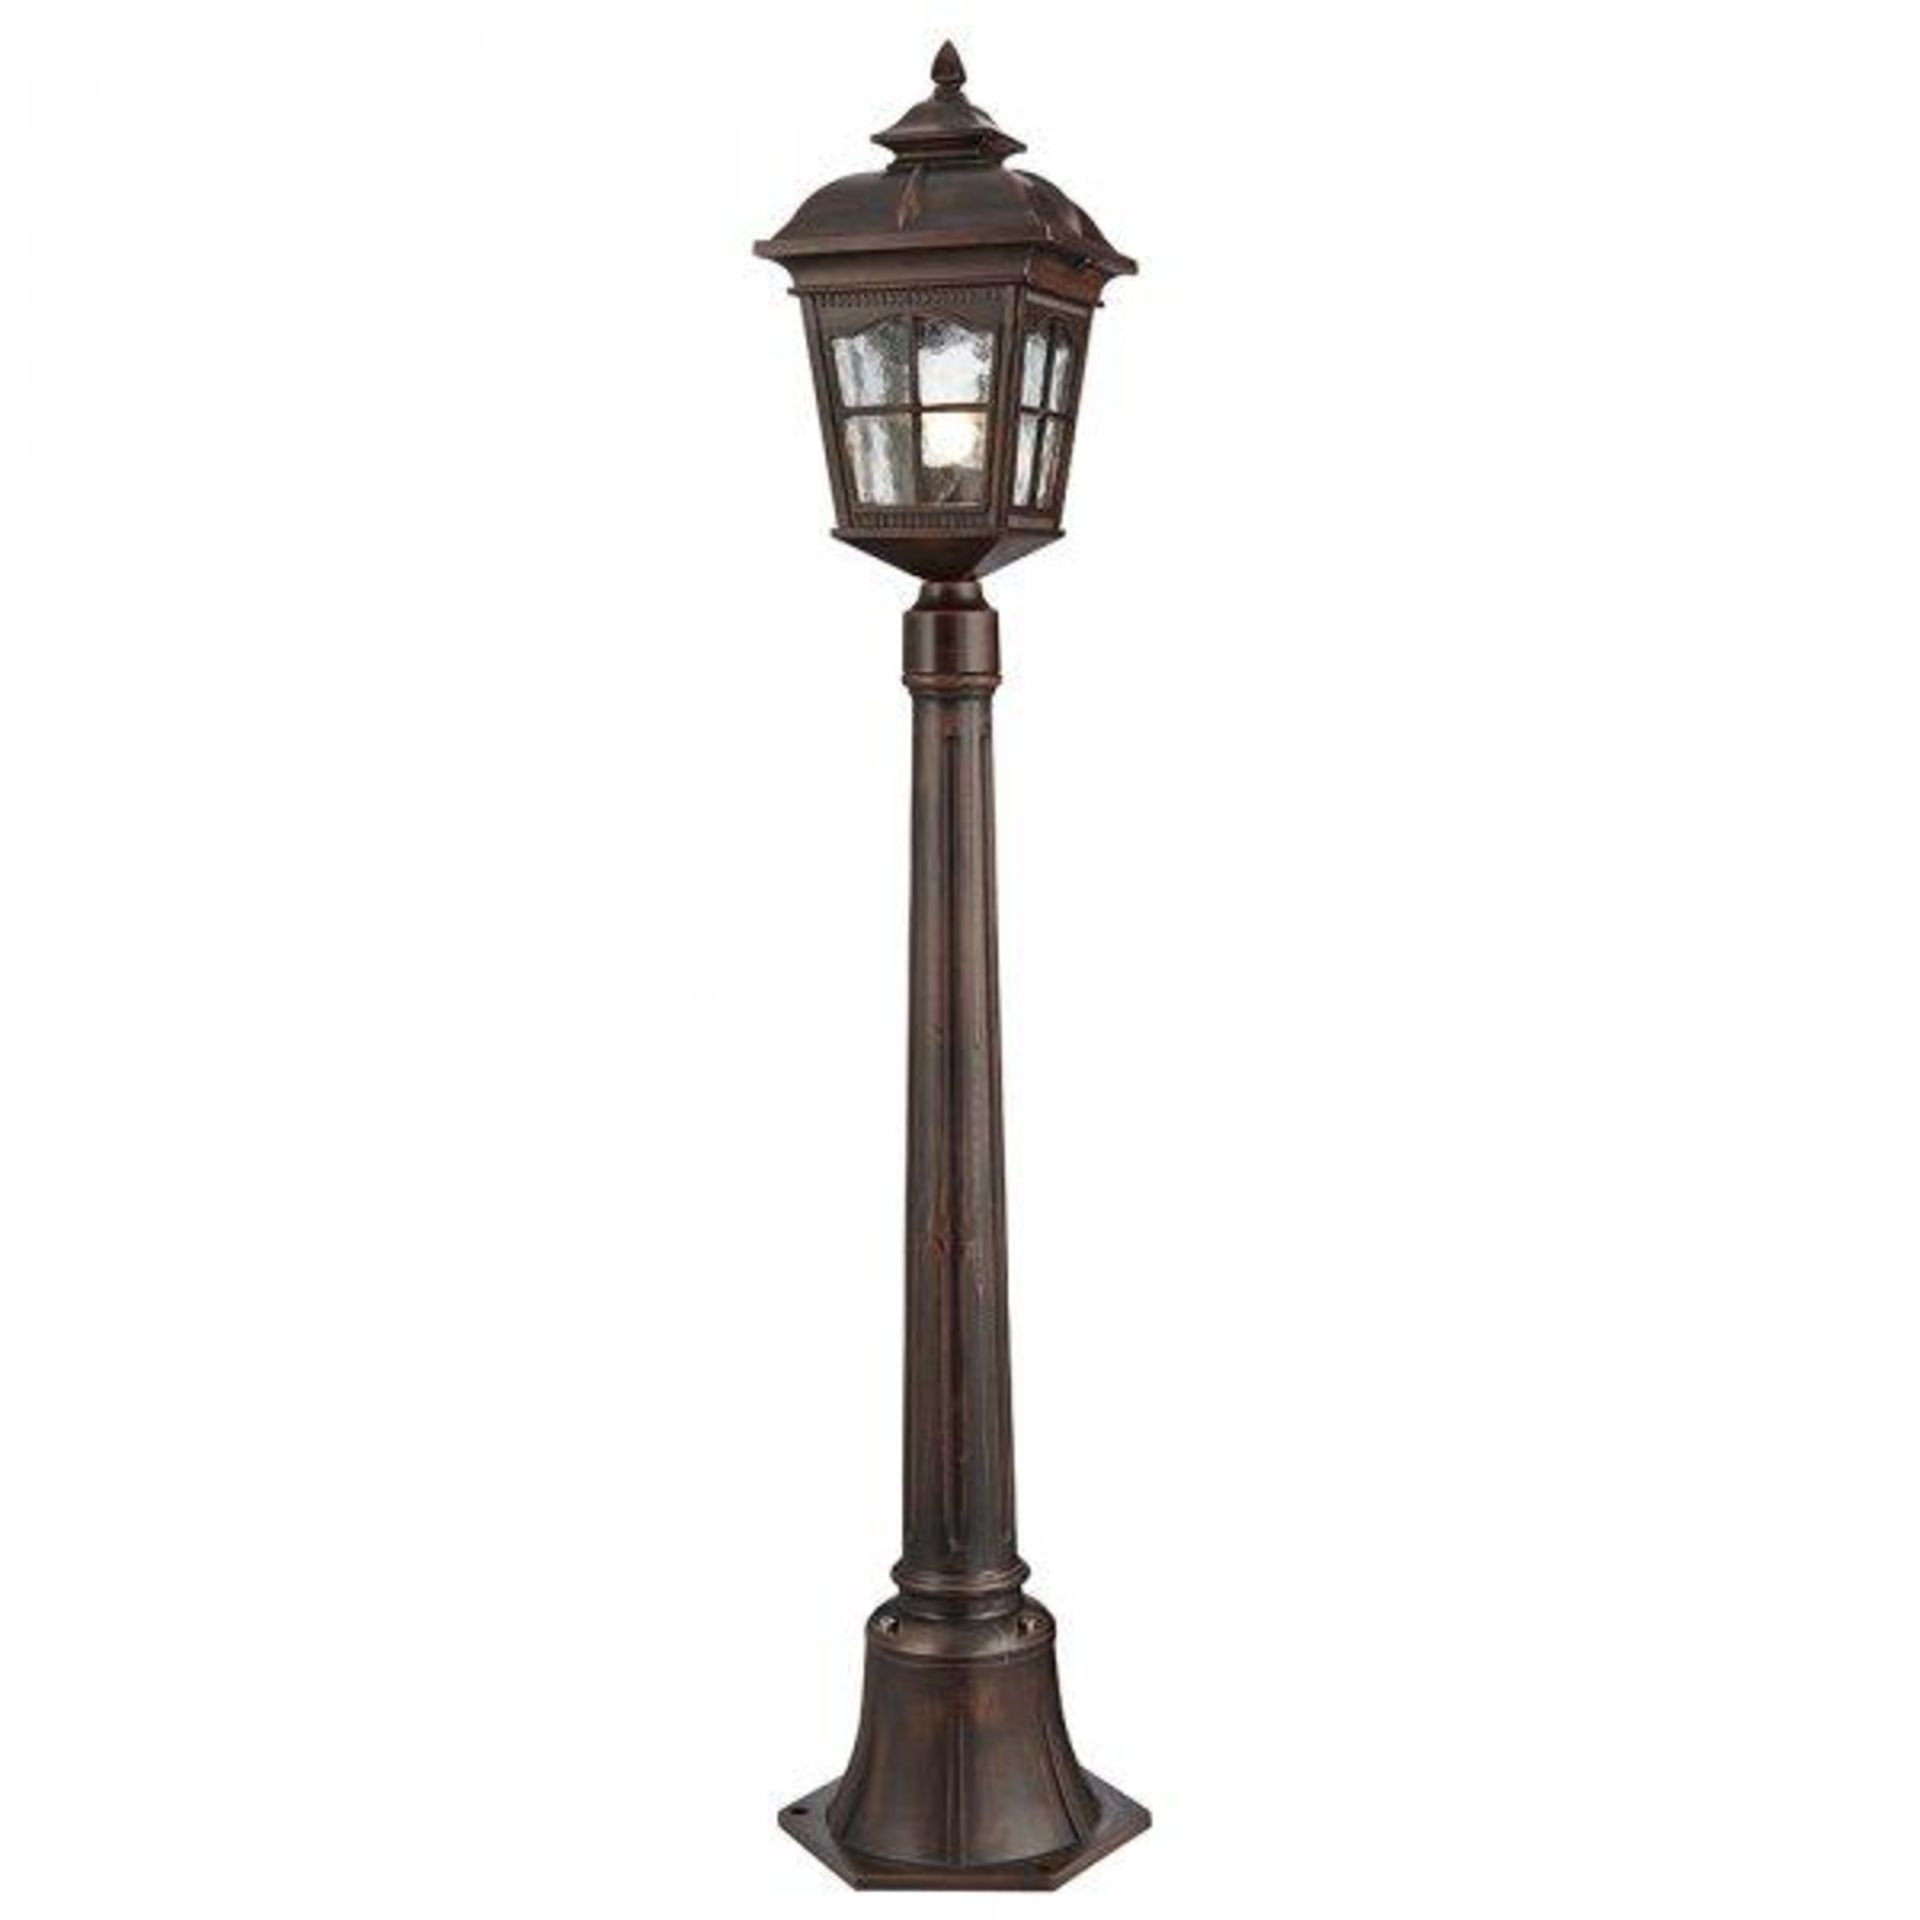 1 x Pompeii Brown Stone Aluminium IP44 Outdoor Post Light - 108cm Height - New Boxed Stock - CL323 - - Image 3 of 4